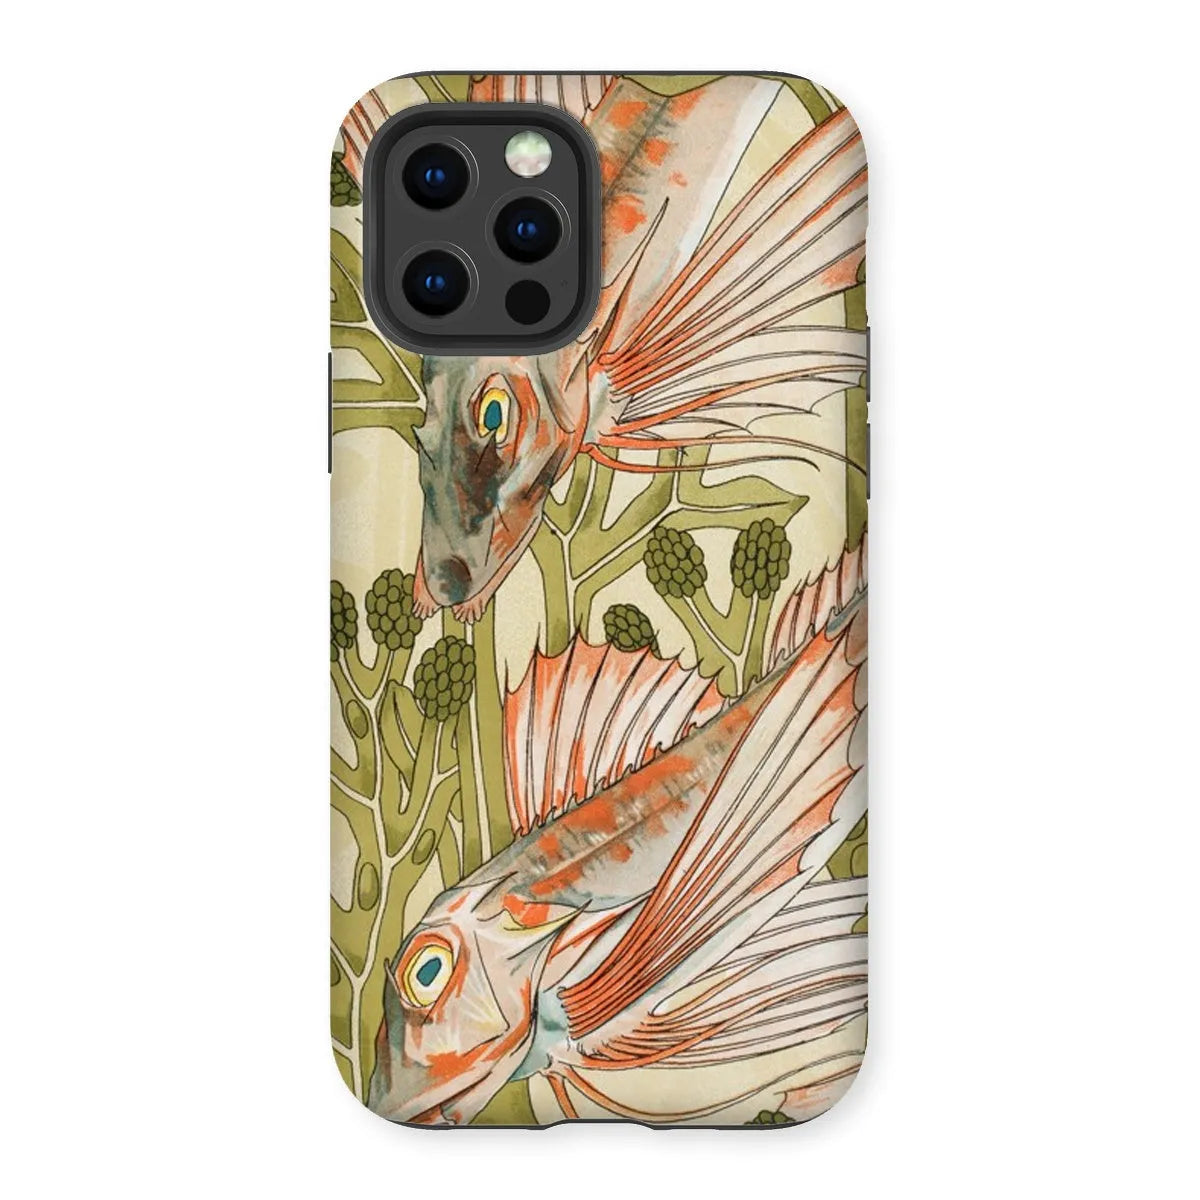 Red Fish - Animal Art Phone Case - Maurice Pillard Verneuil - Iphone 12 Pro / Matte - Mobile Phone Cases - Aesthetic Art